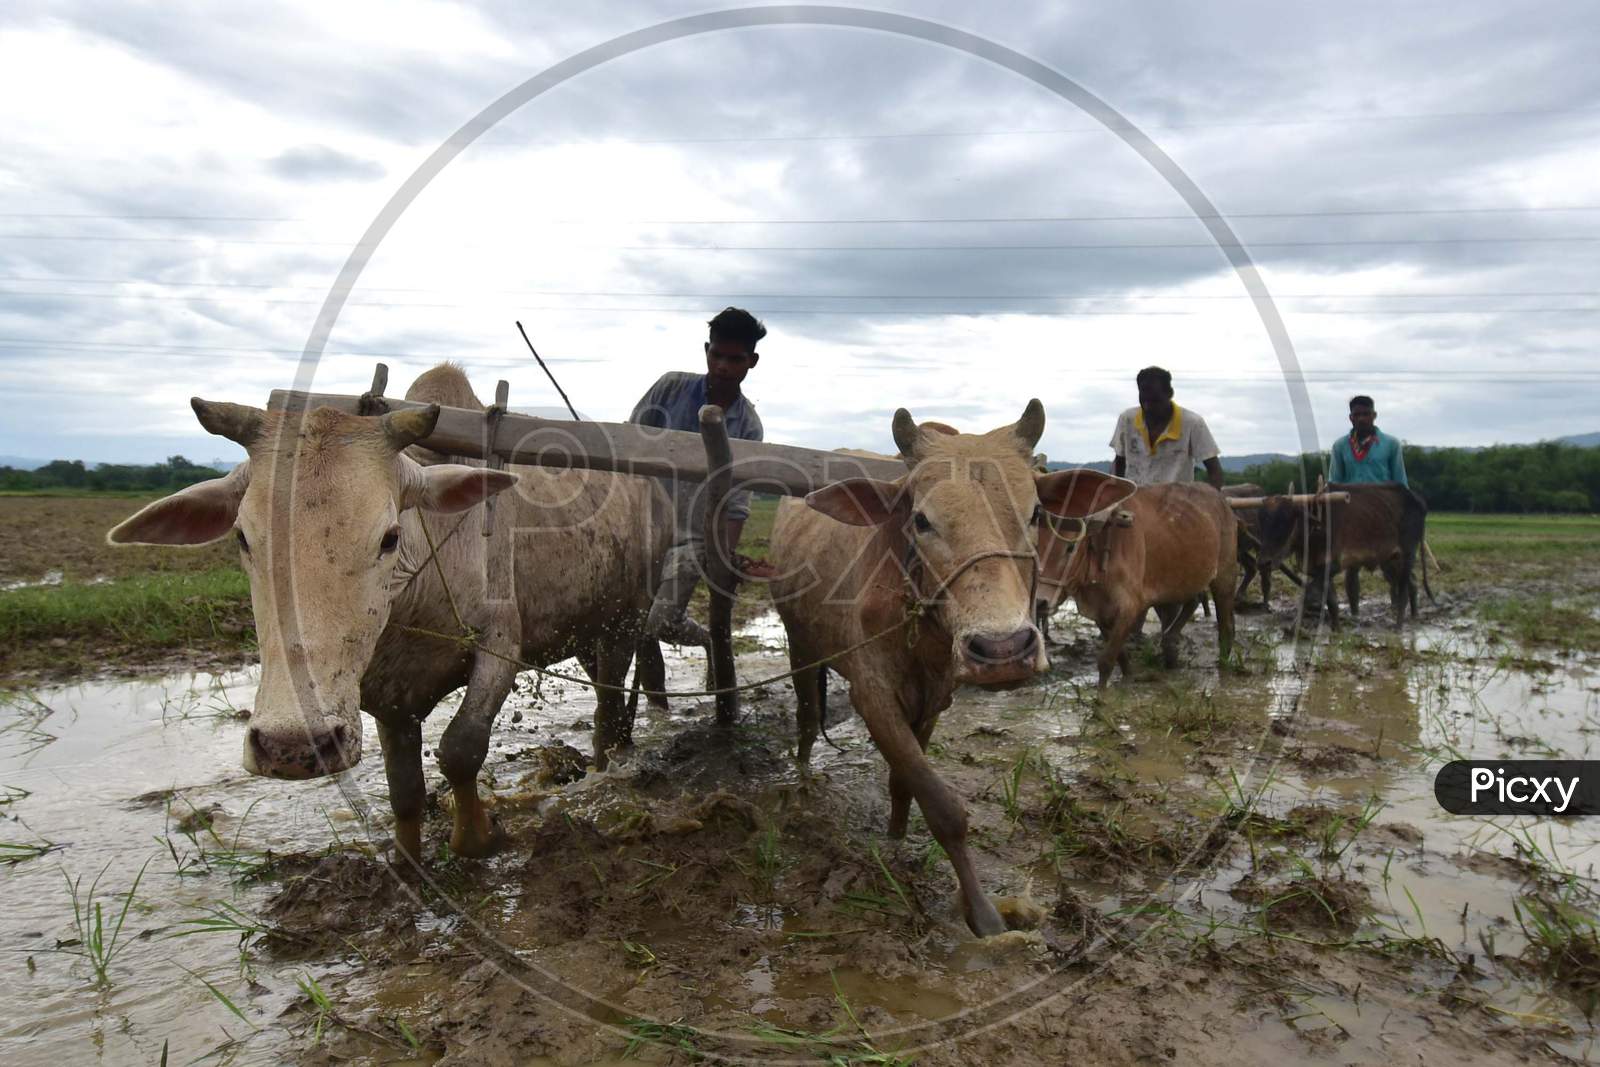 Indian Farmers Plough a Field For Paddy Plantation In Nagaon District In The Northeastern State Of Assam, India